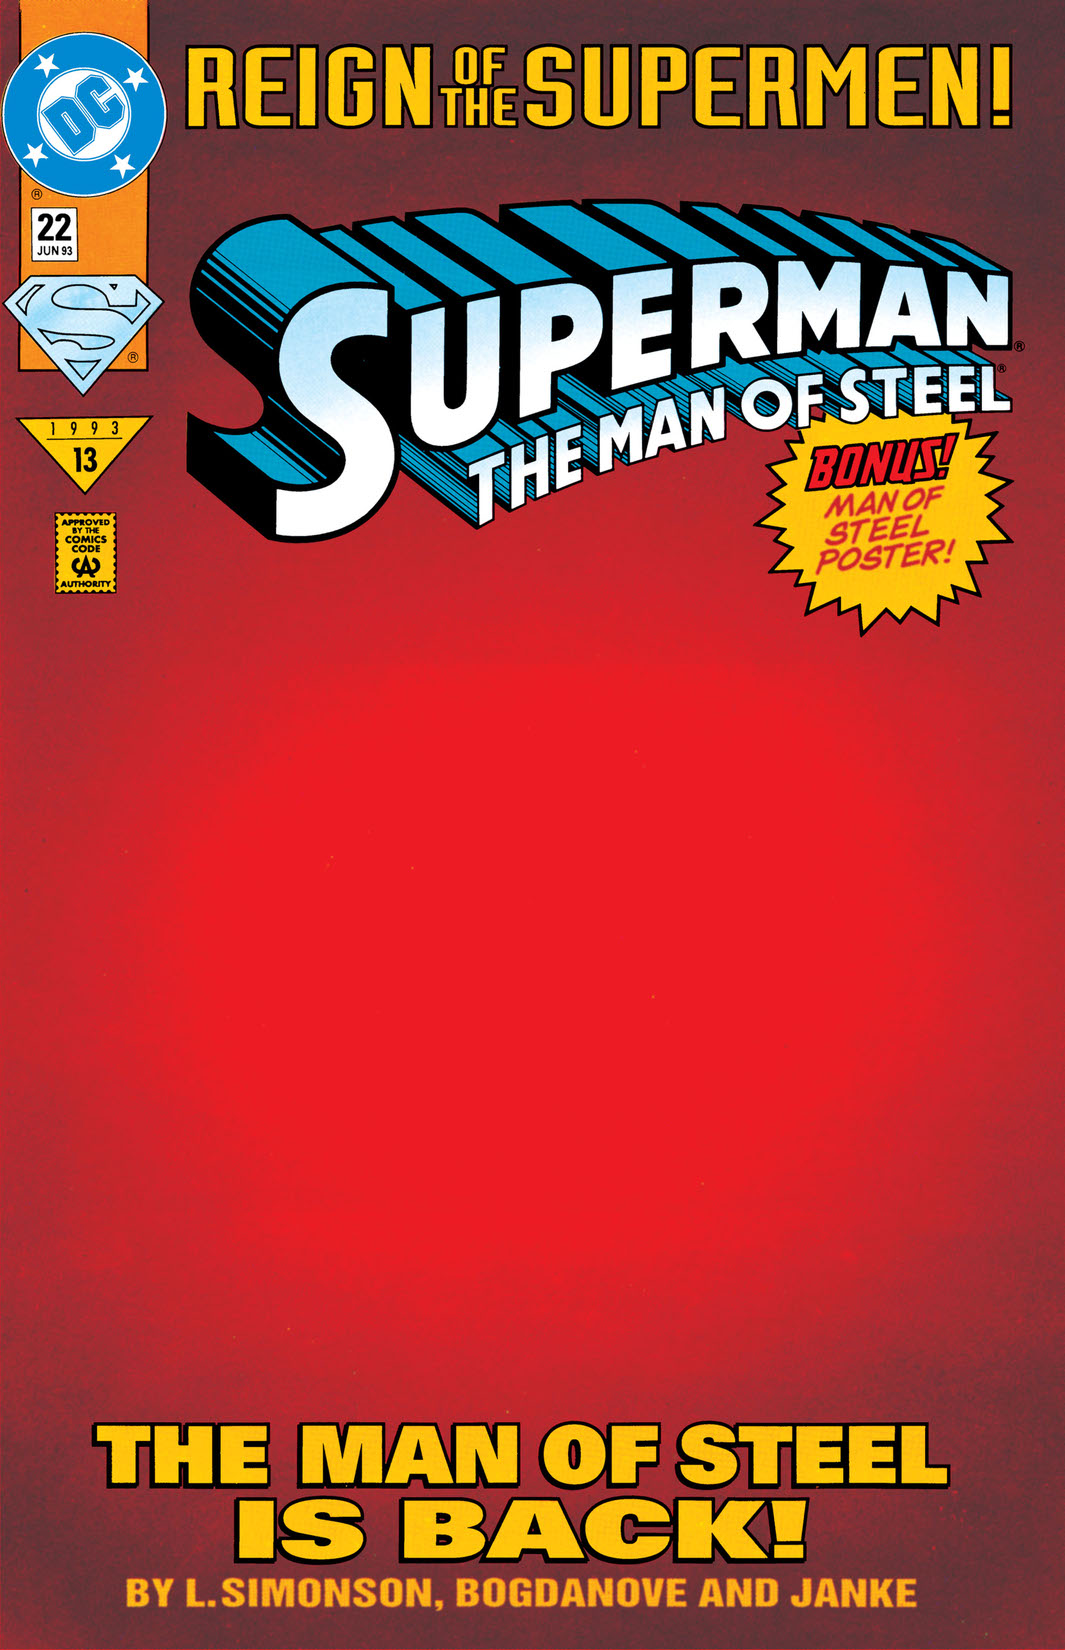 Superman: The Man of Steel #22 preview images